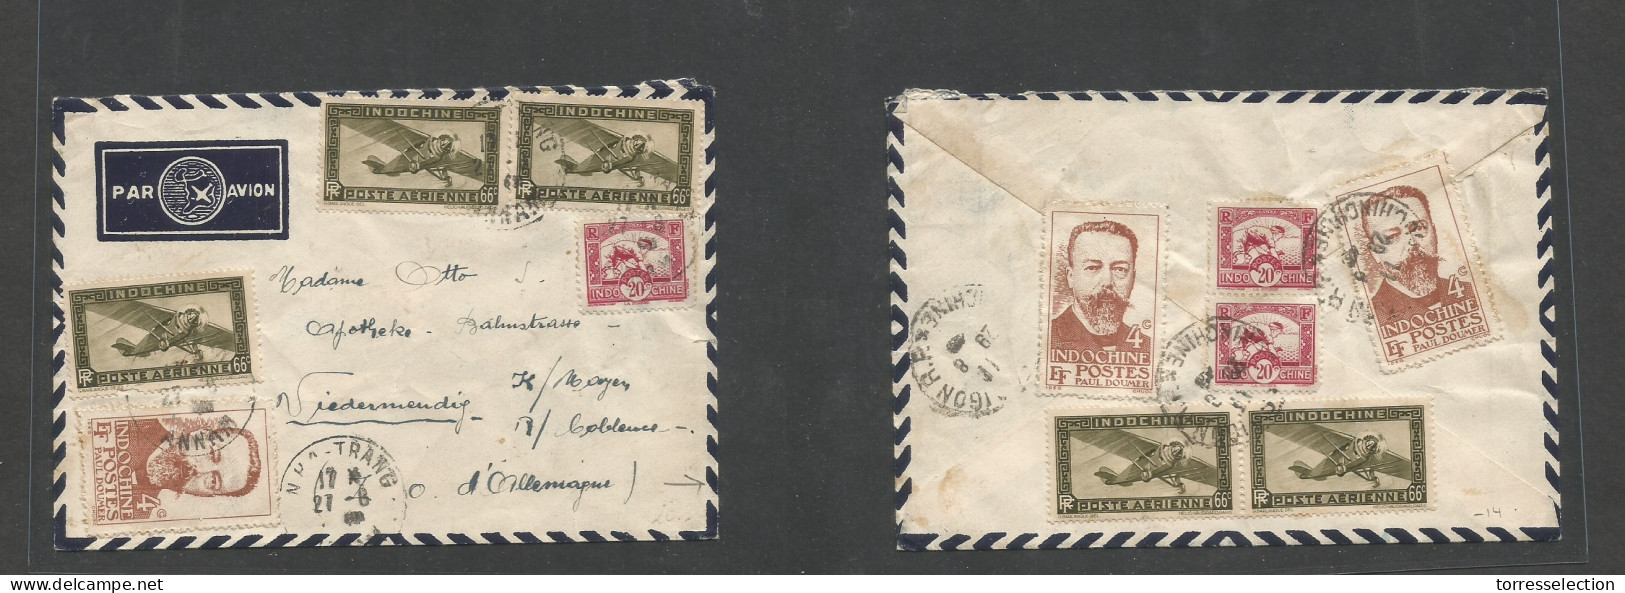 INDOCHINA. C. 1932. Nha Trang - Germany, Viedermendig. Air Multifkd Front And Reverse. Fine Used. SALE. - Asia (Other)